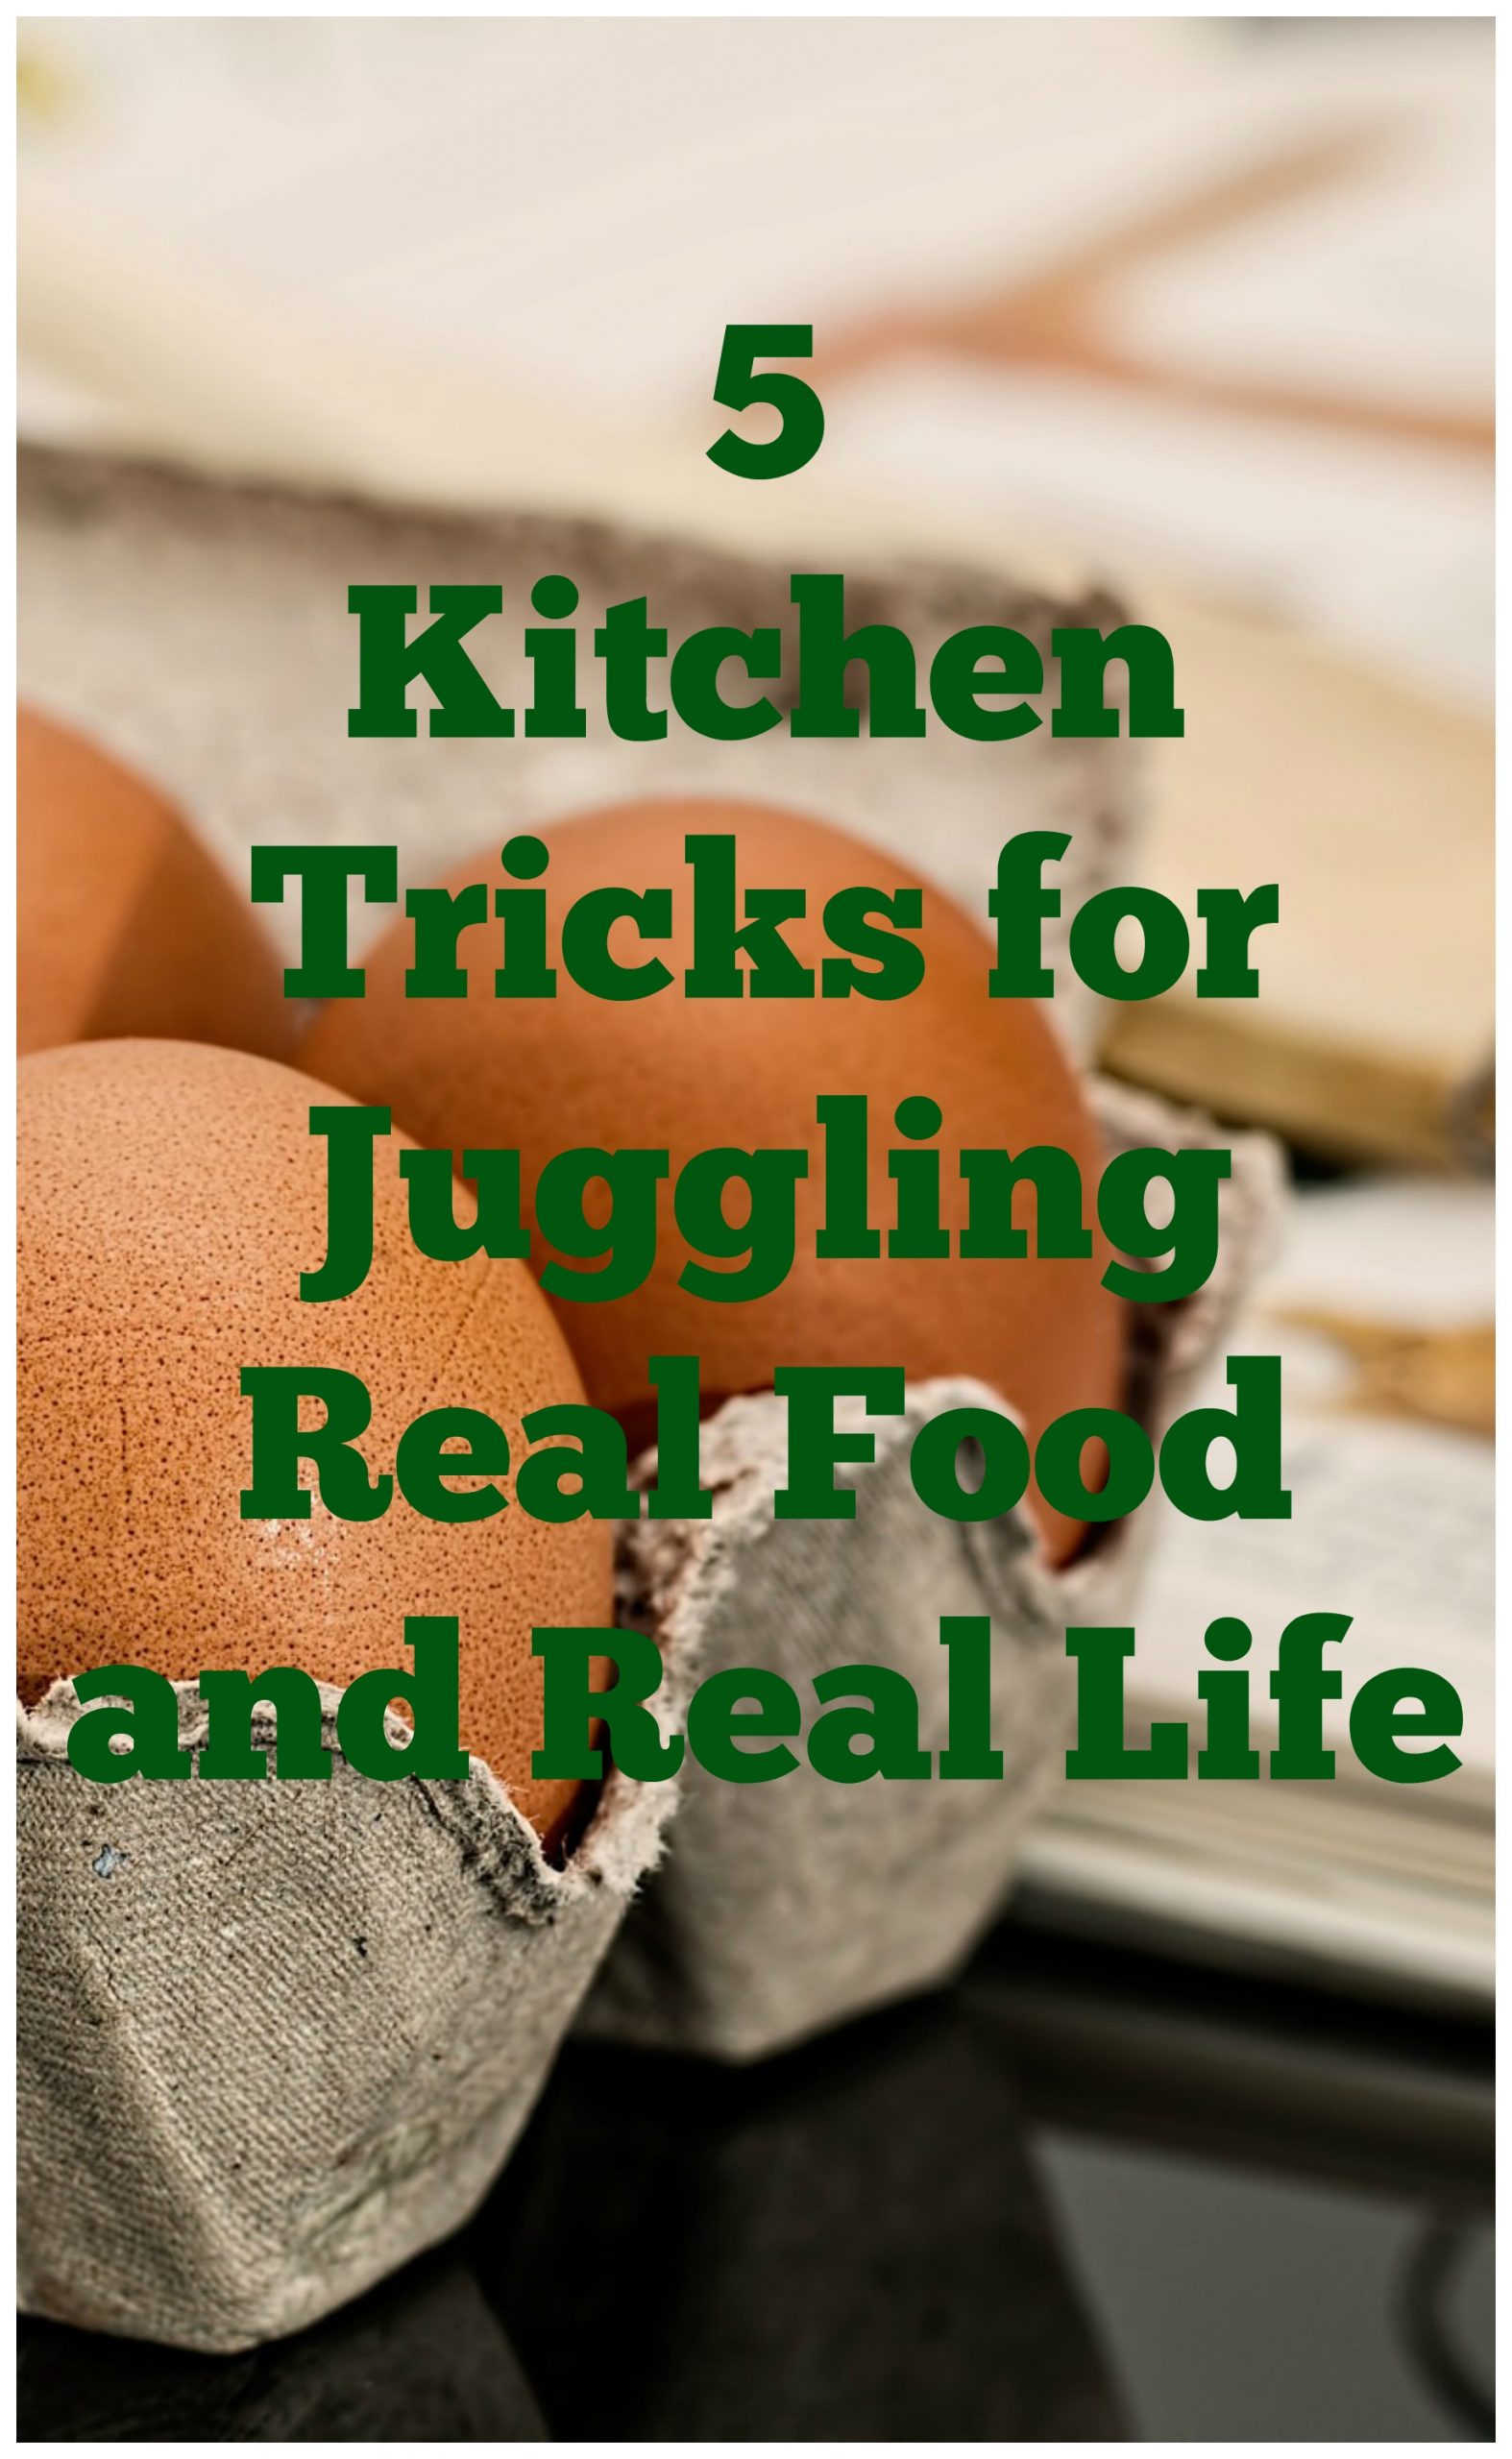 5 Kitchen Tricks for Juggling Real Food and Real Life